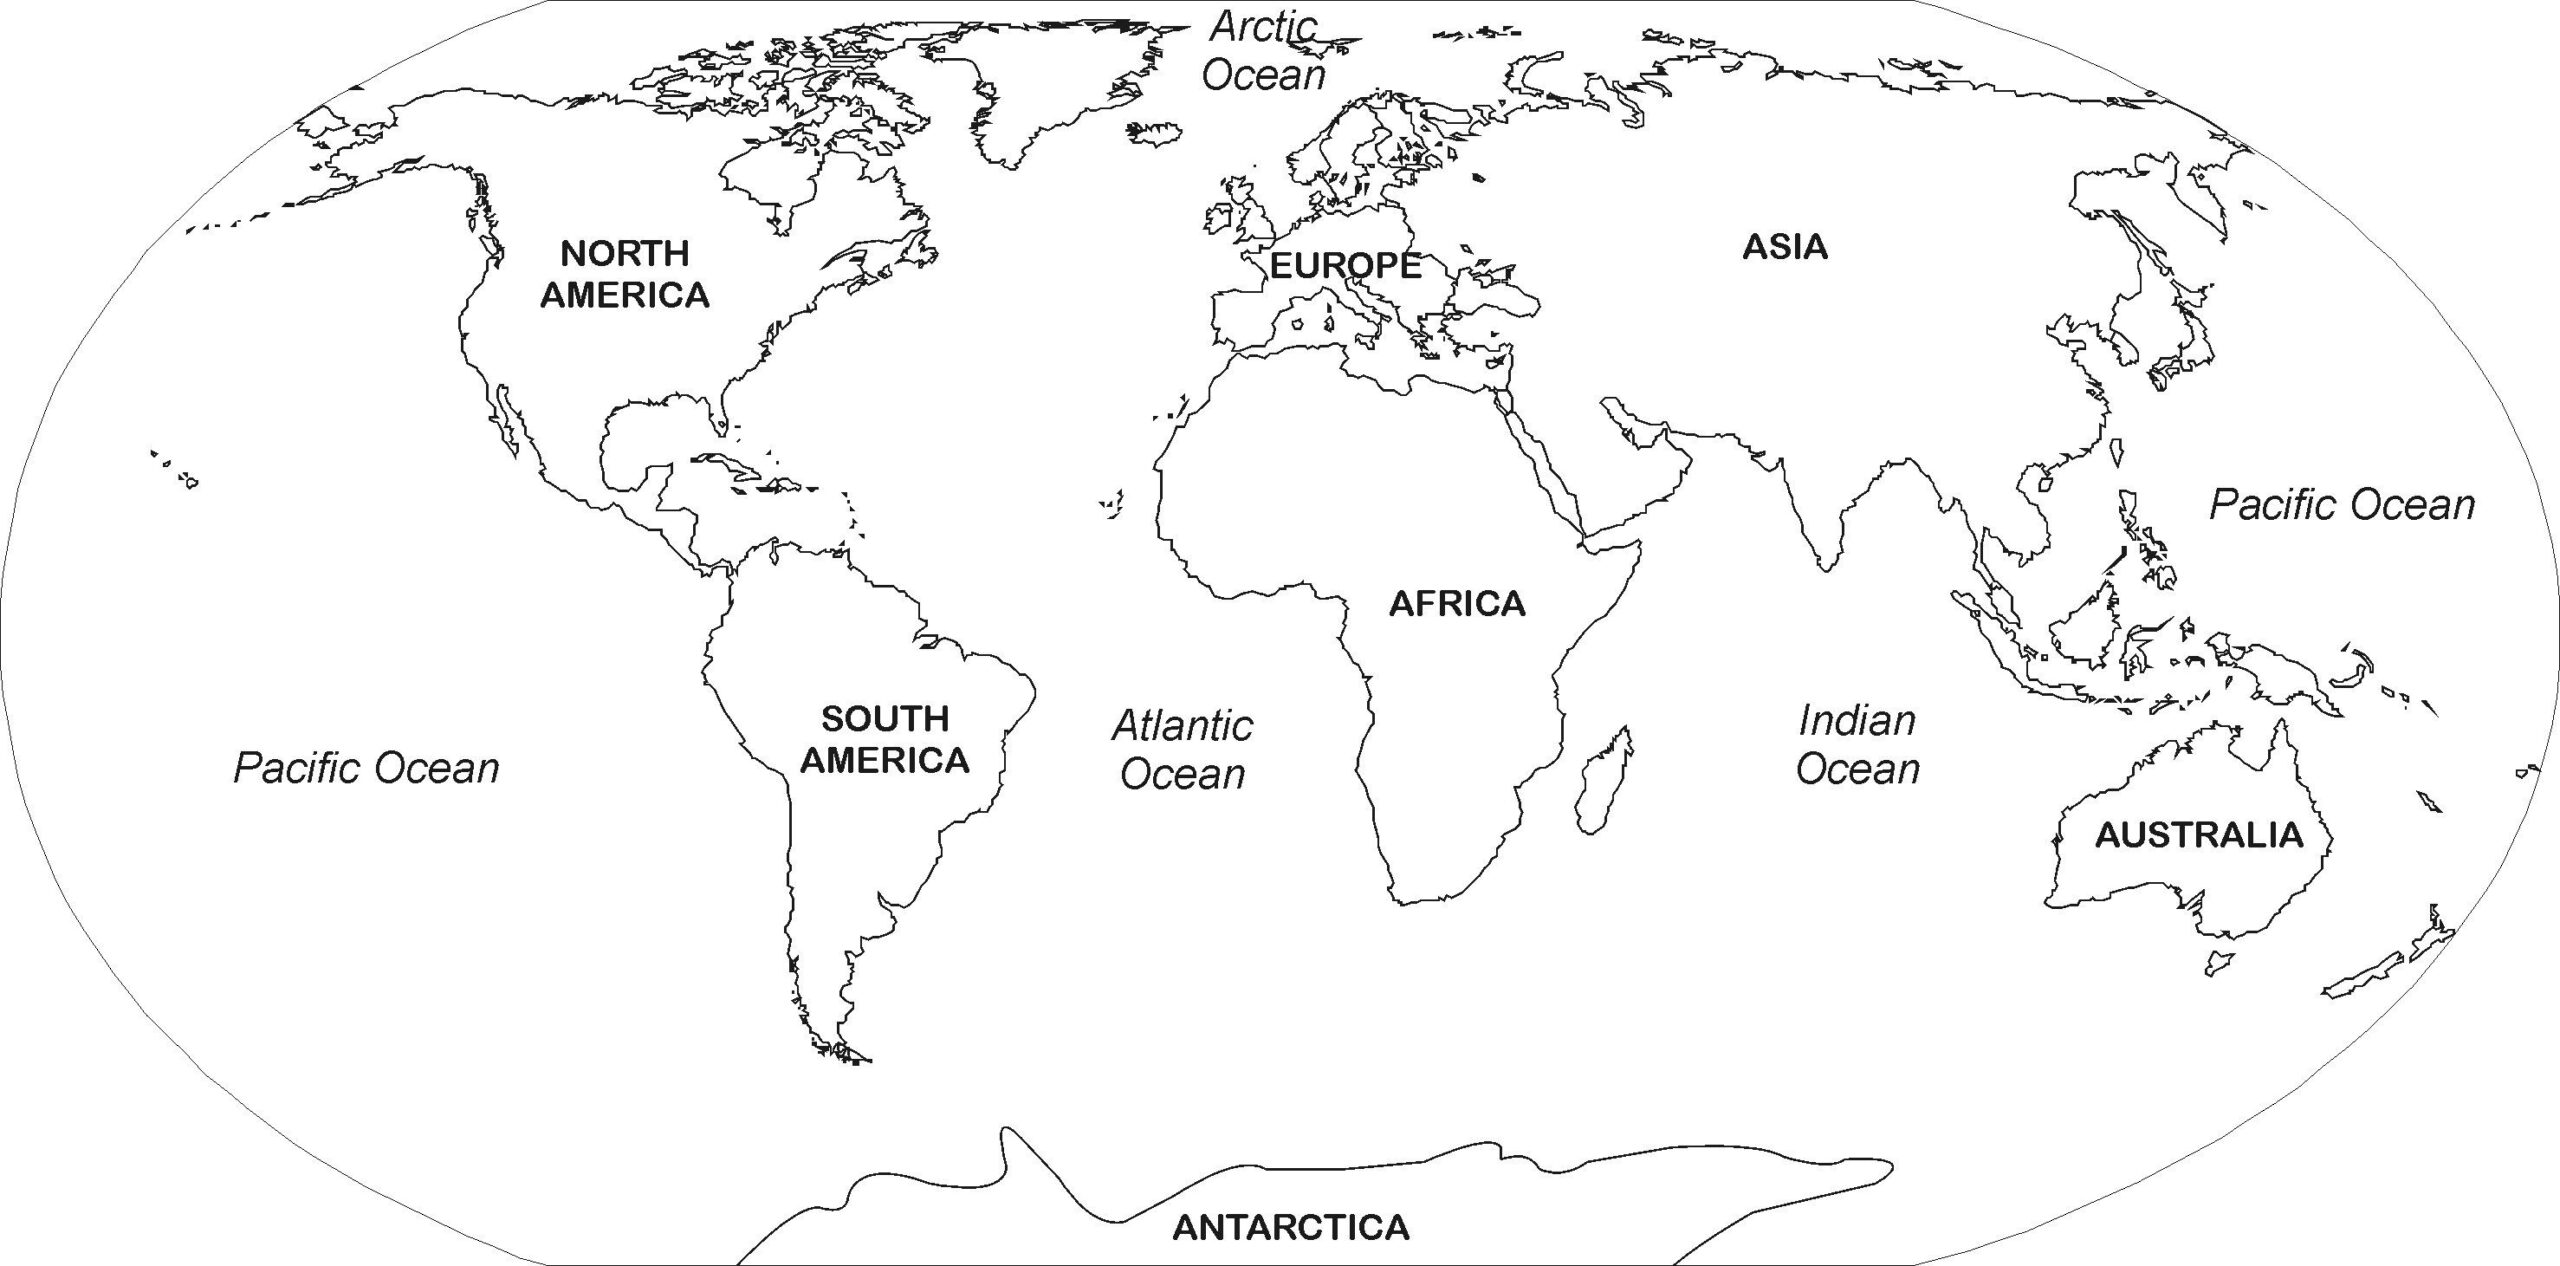 Black And White World Map With Continents Labeled Best Of How To At 